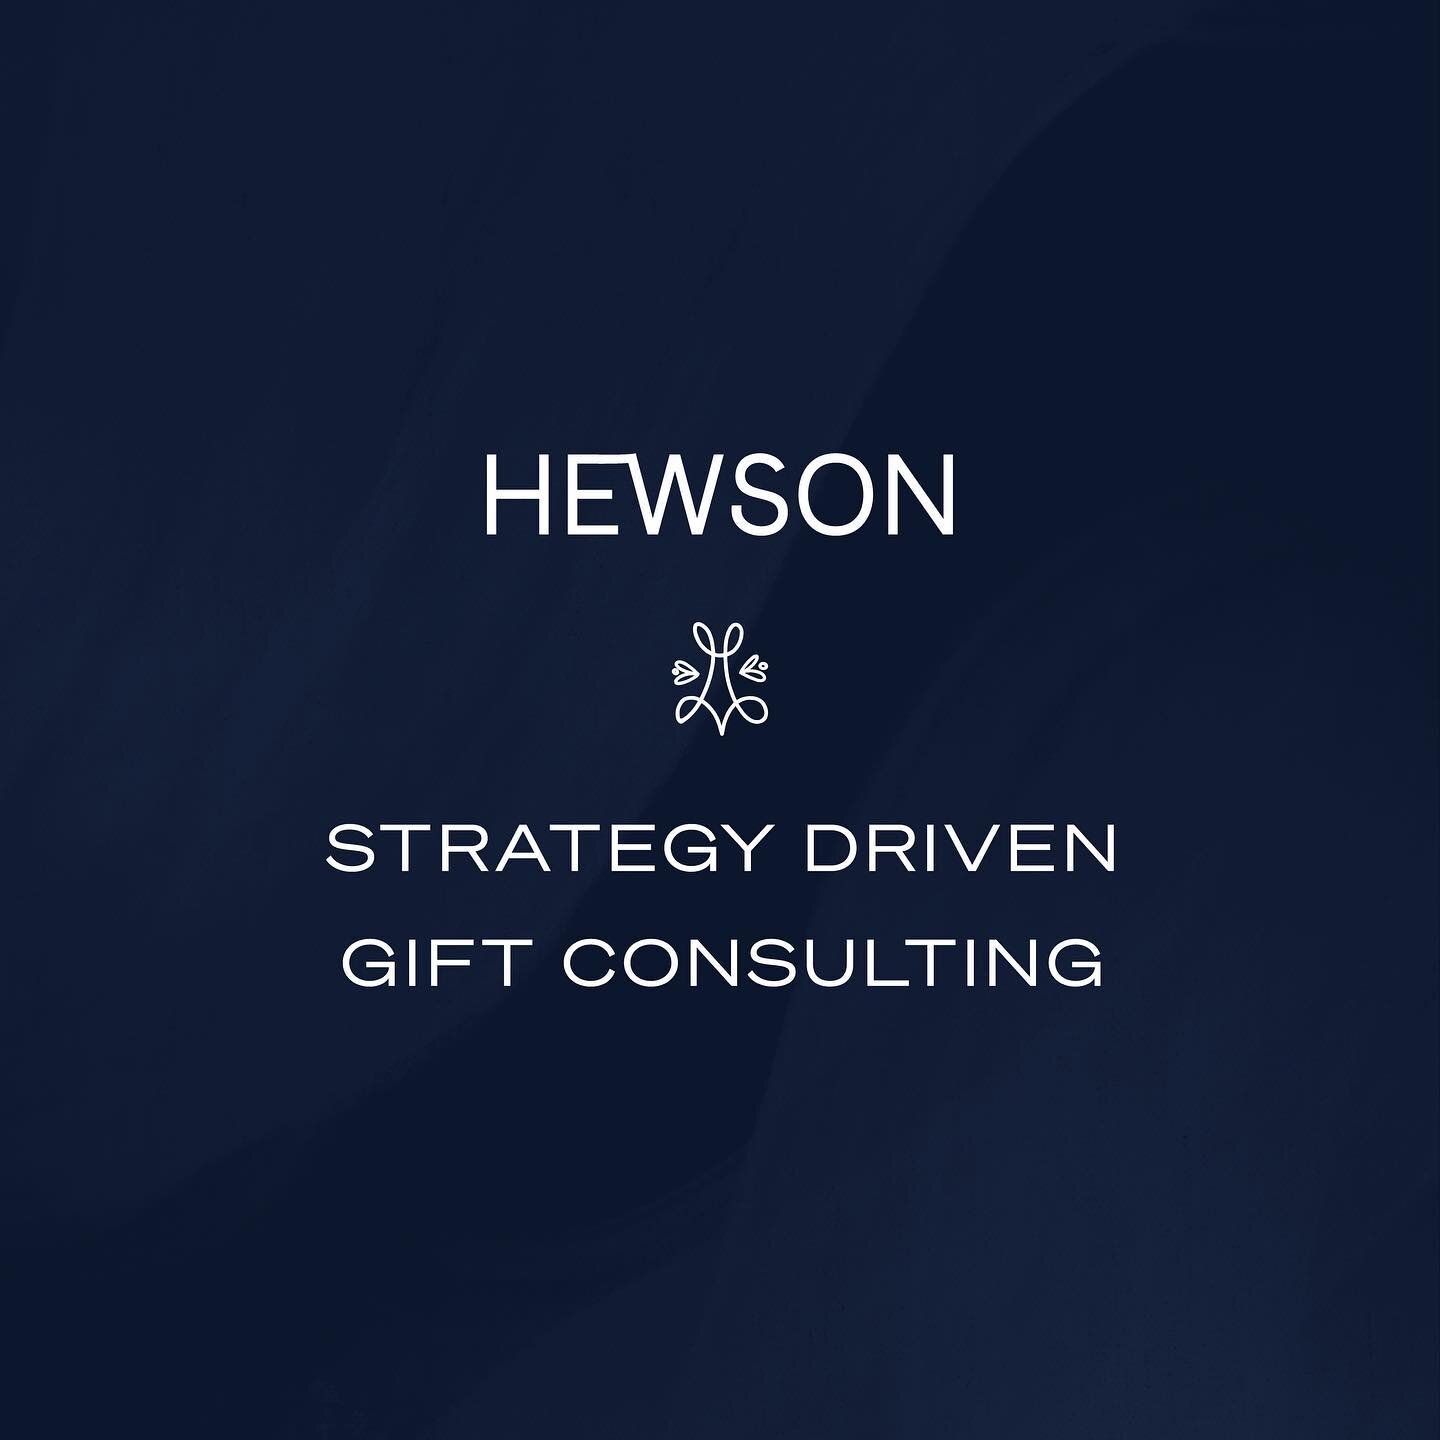 So excited to share what I&rsquo;ve been working on with @bytelltale, SOON!
.
.
.
.
.
.
#hewsonco #hewson #strategicgifting